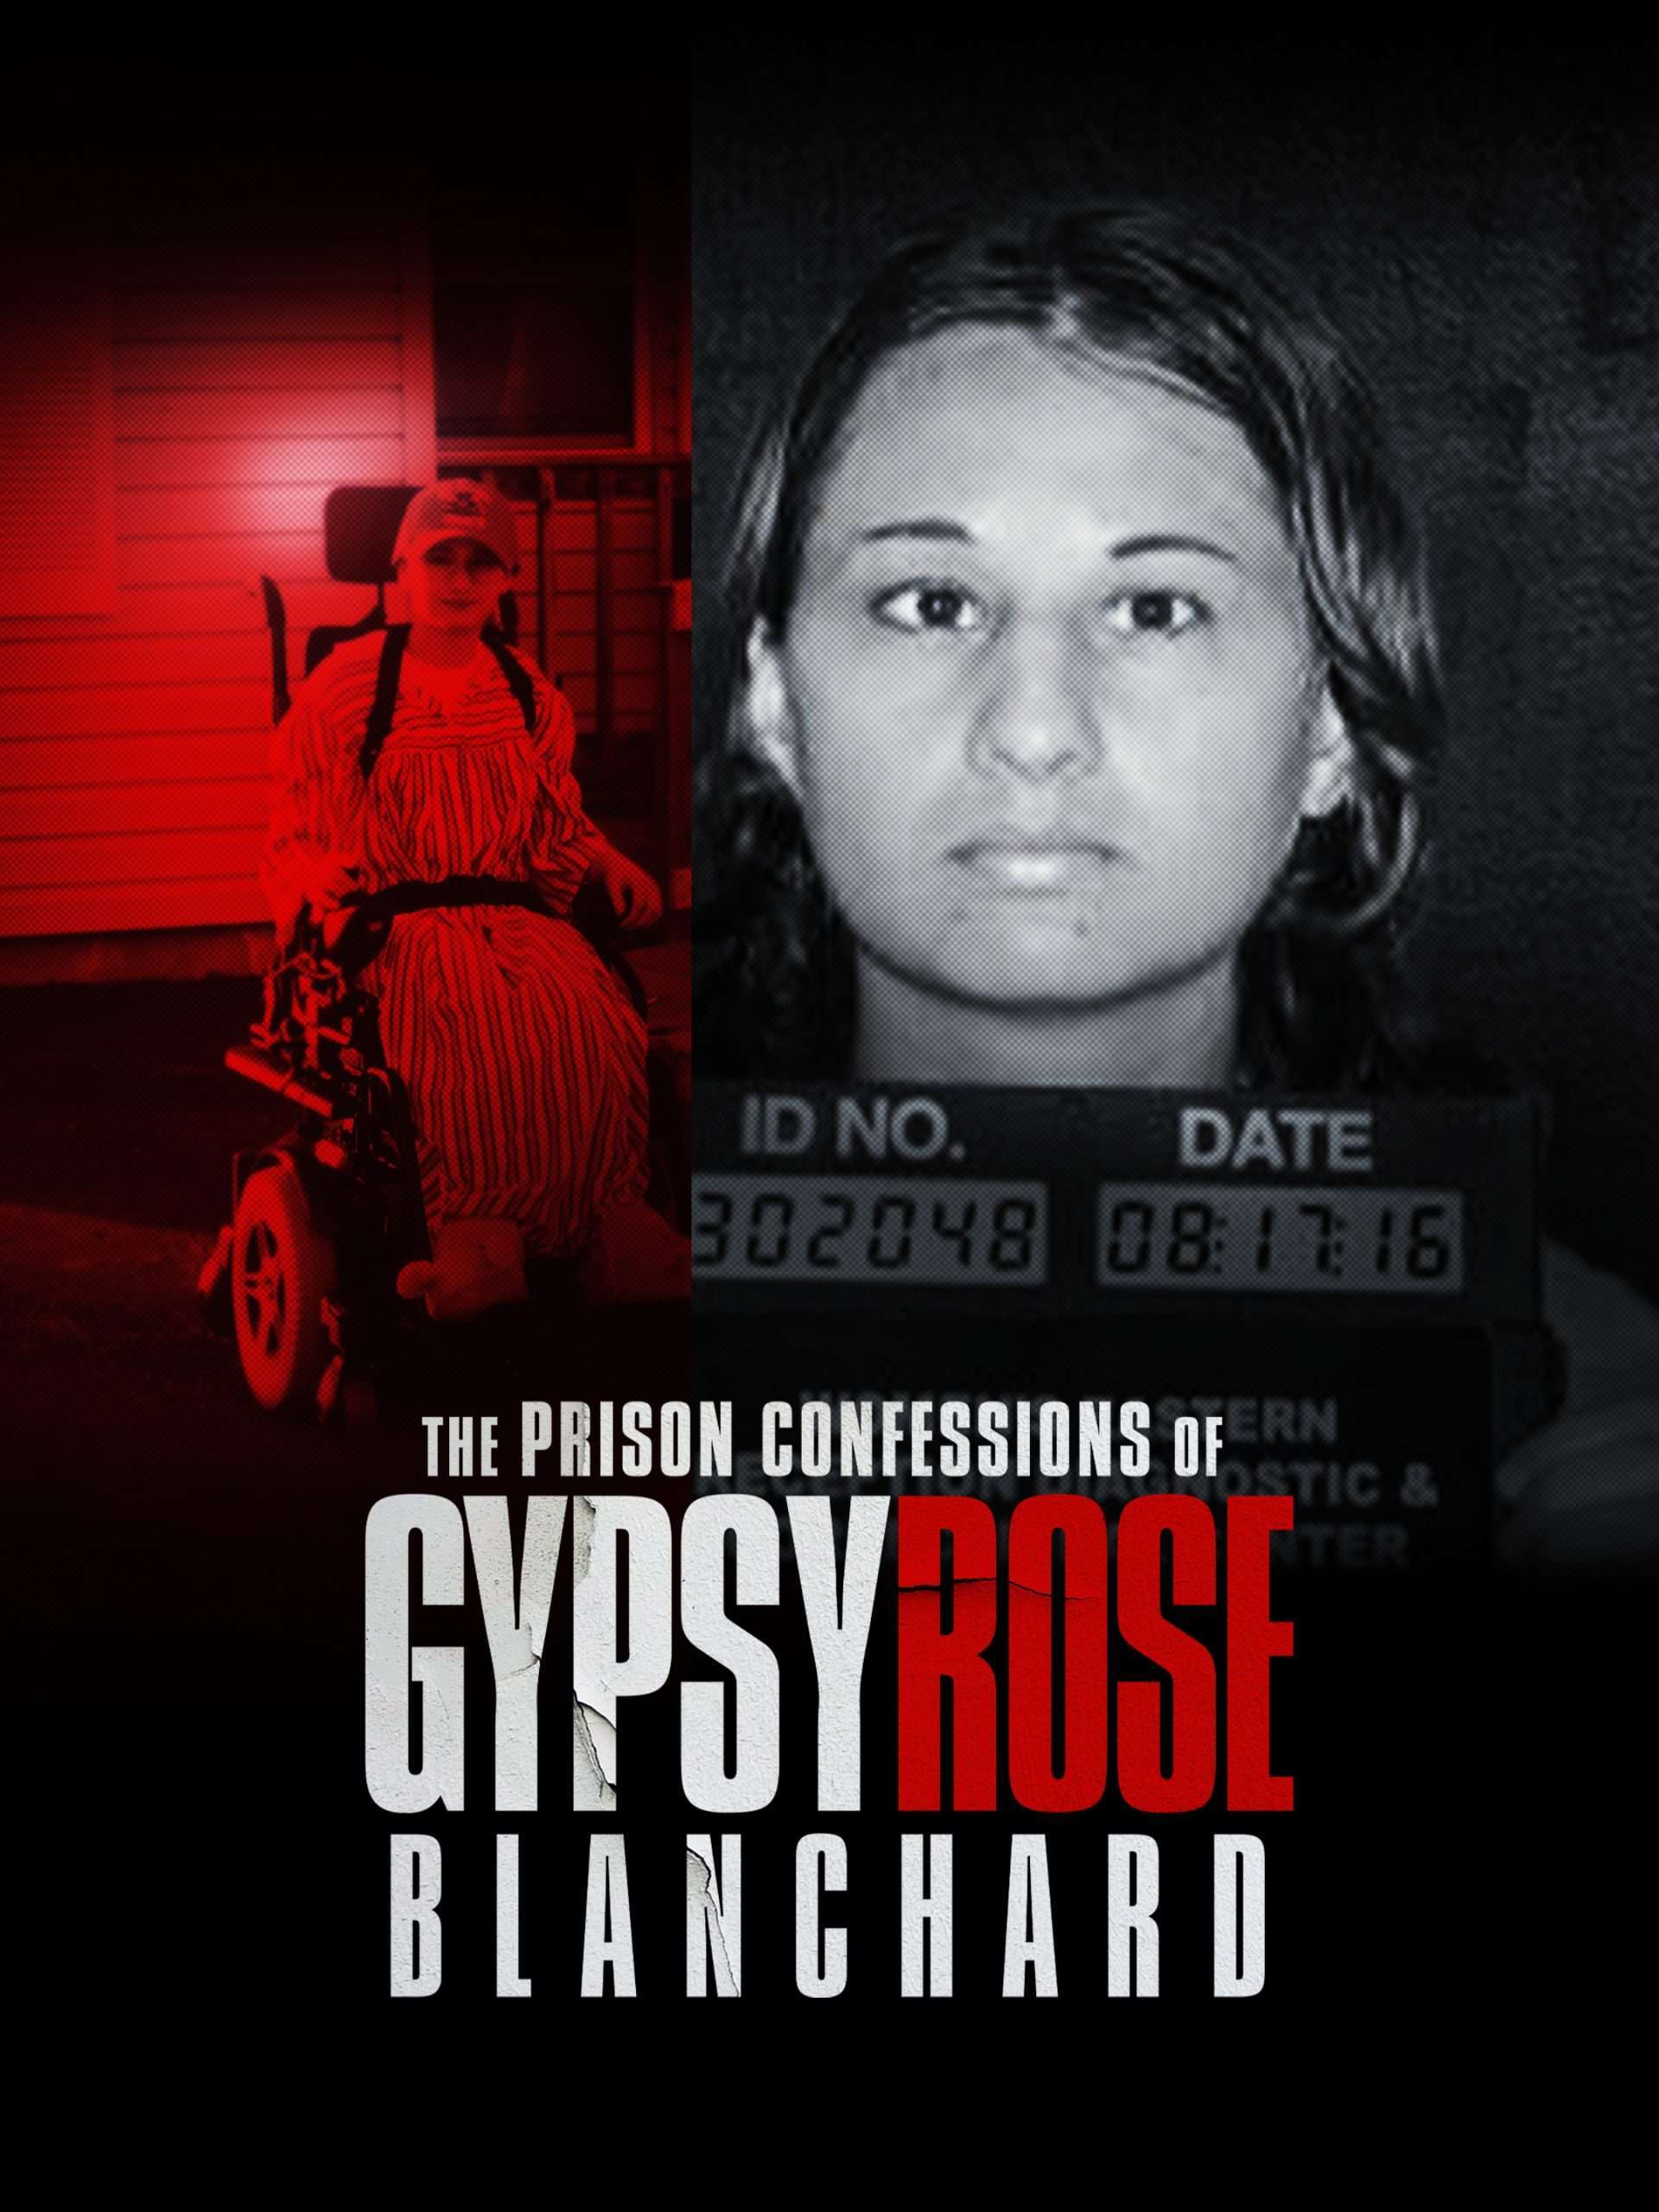 The Prison Confessions of Gypsy Rose Blanchard "Secret Engagement" S1E5